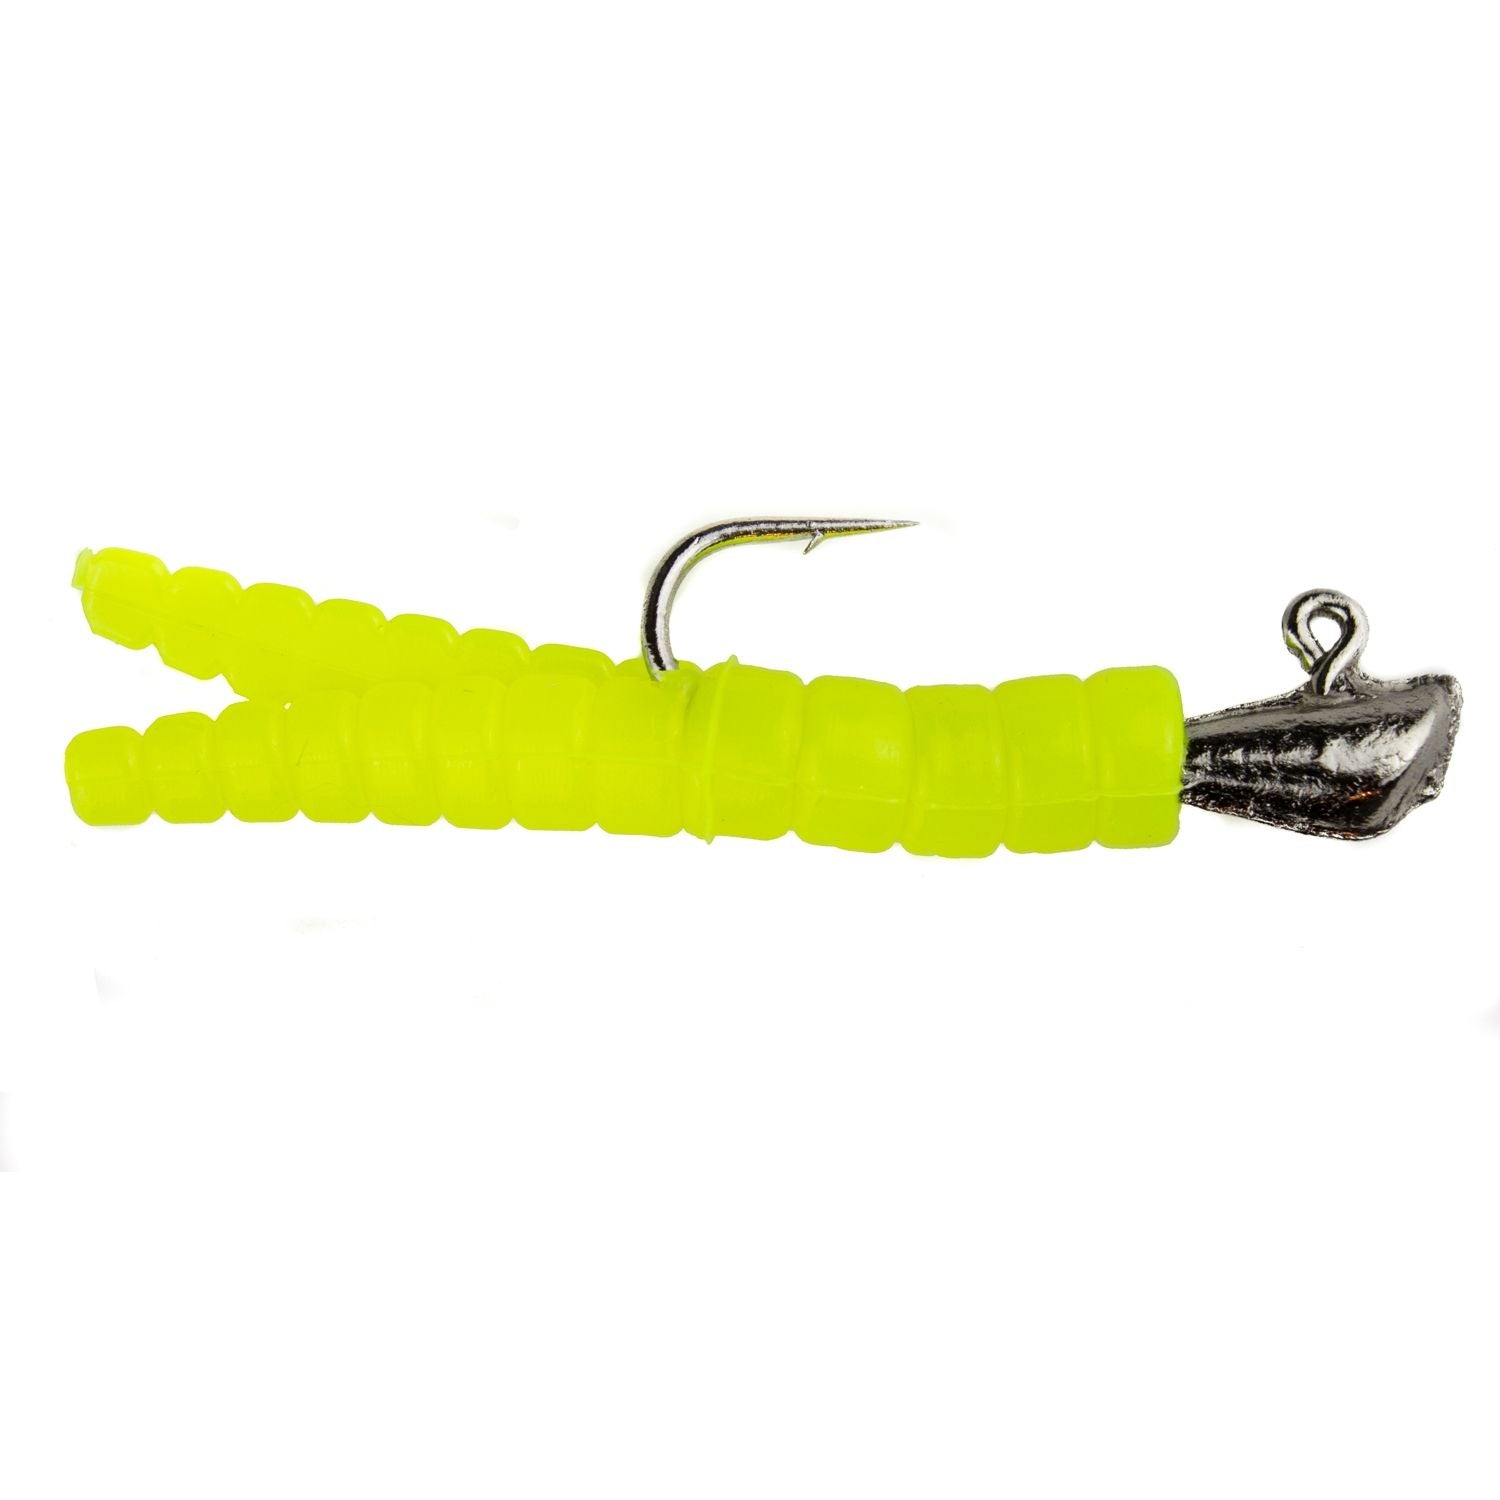 Search results for: 'hook for crappie magnet 1 32 not